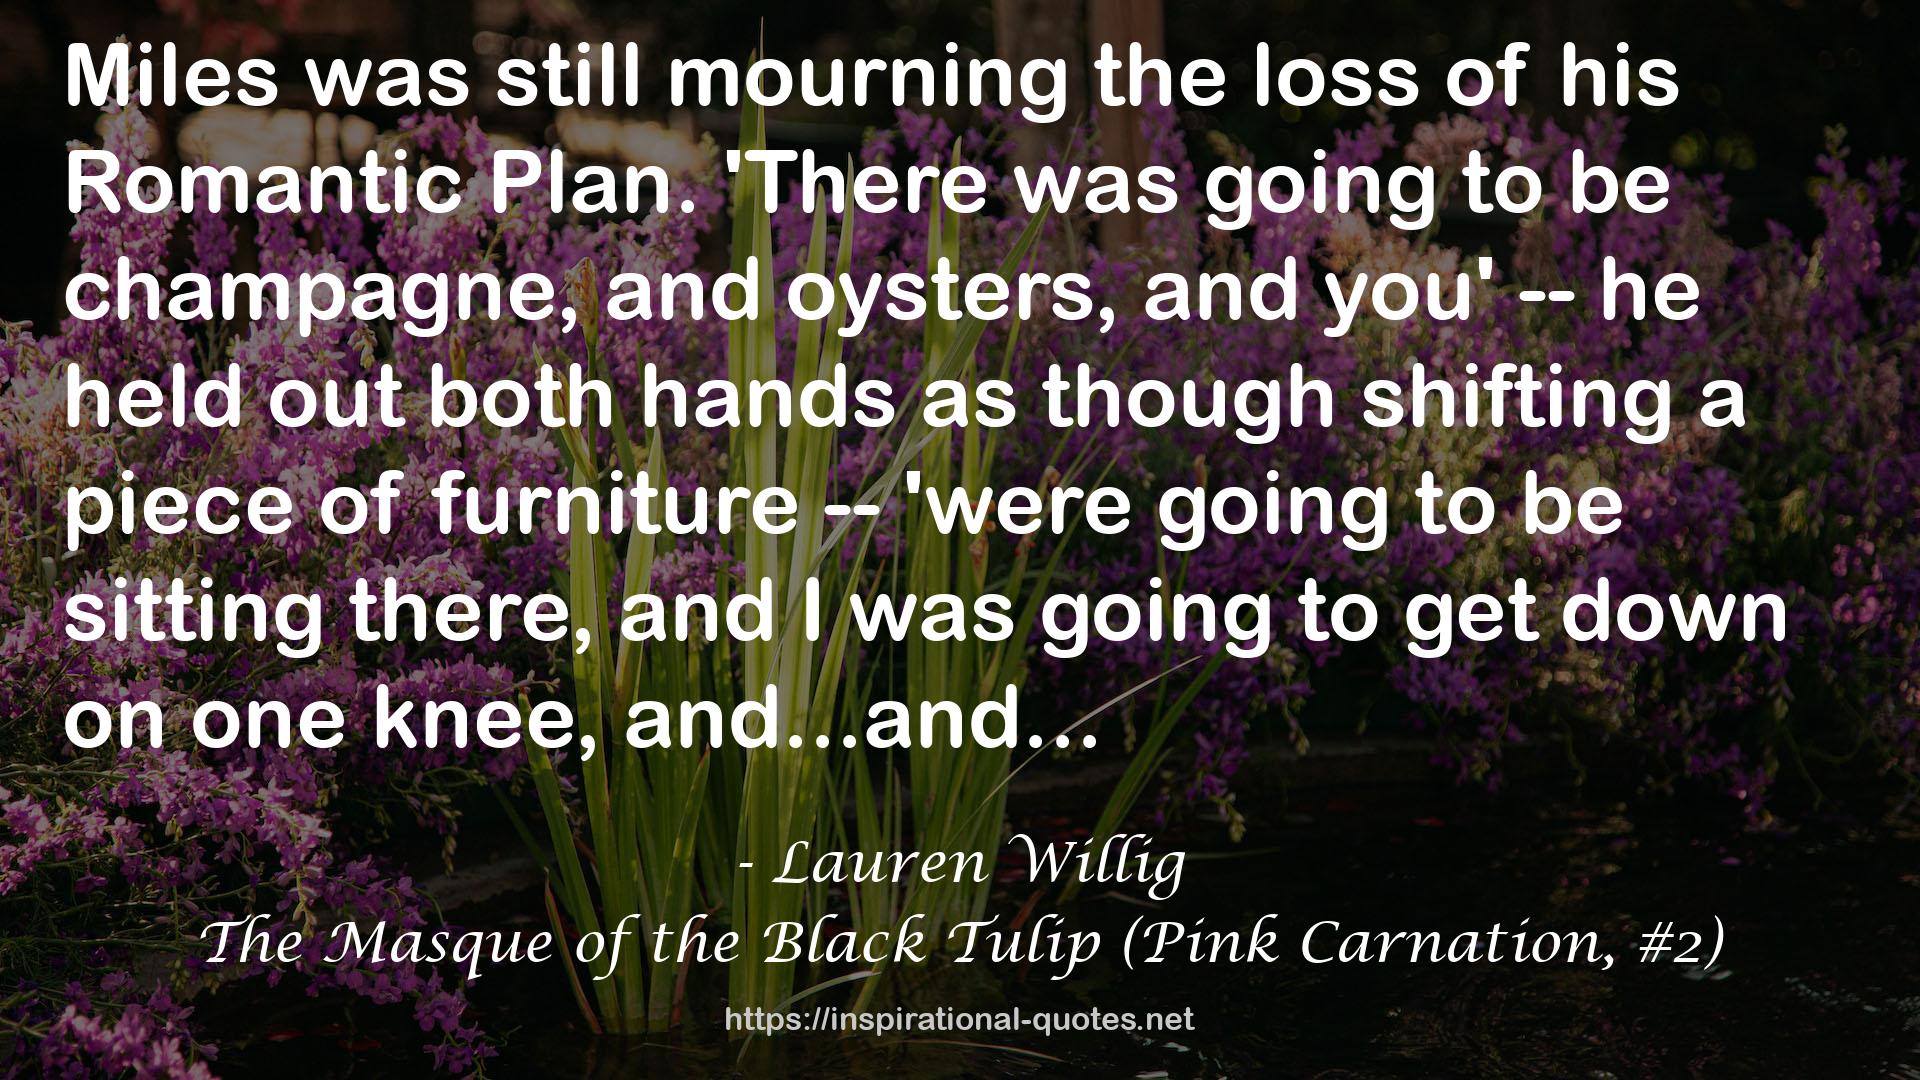 The Masque of the Black Tulip (Pink Carnation, #2) QUOTES